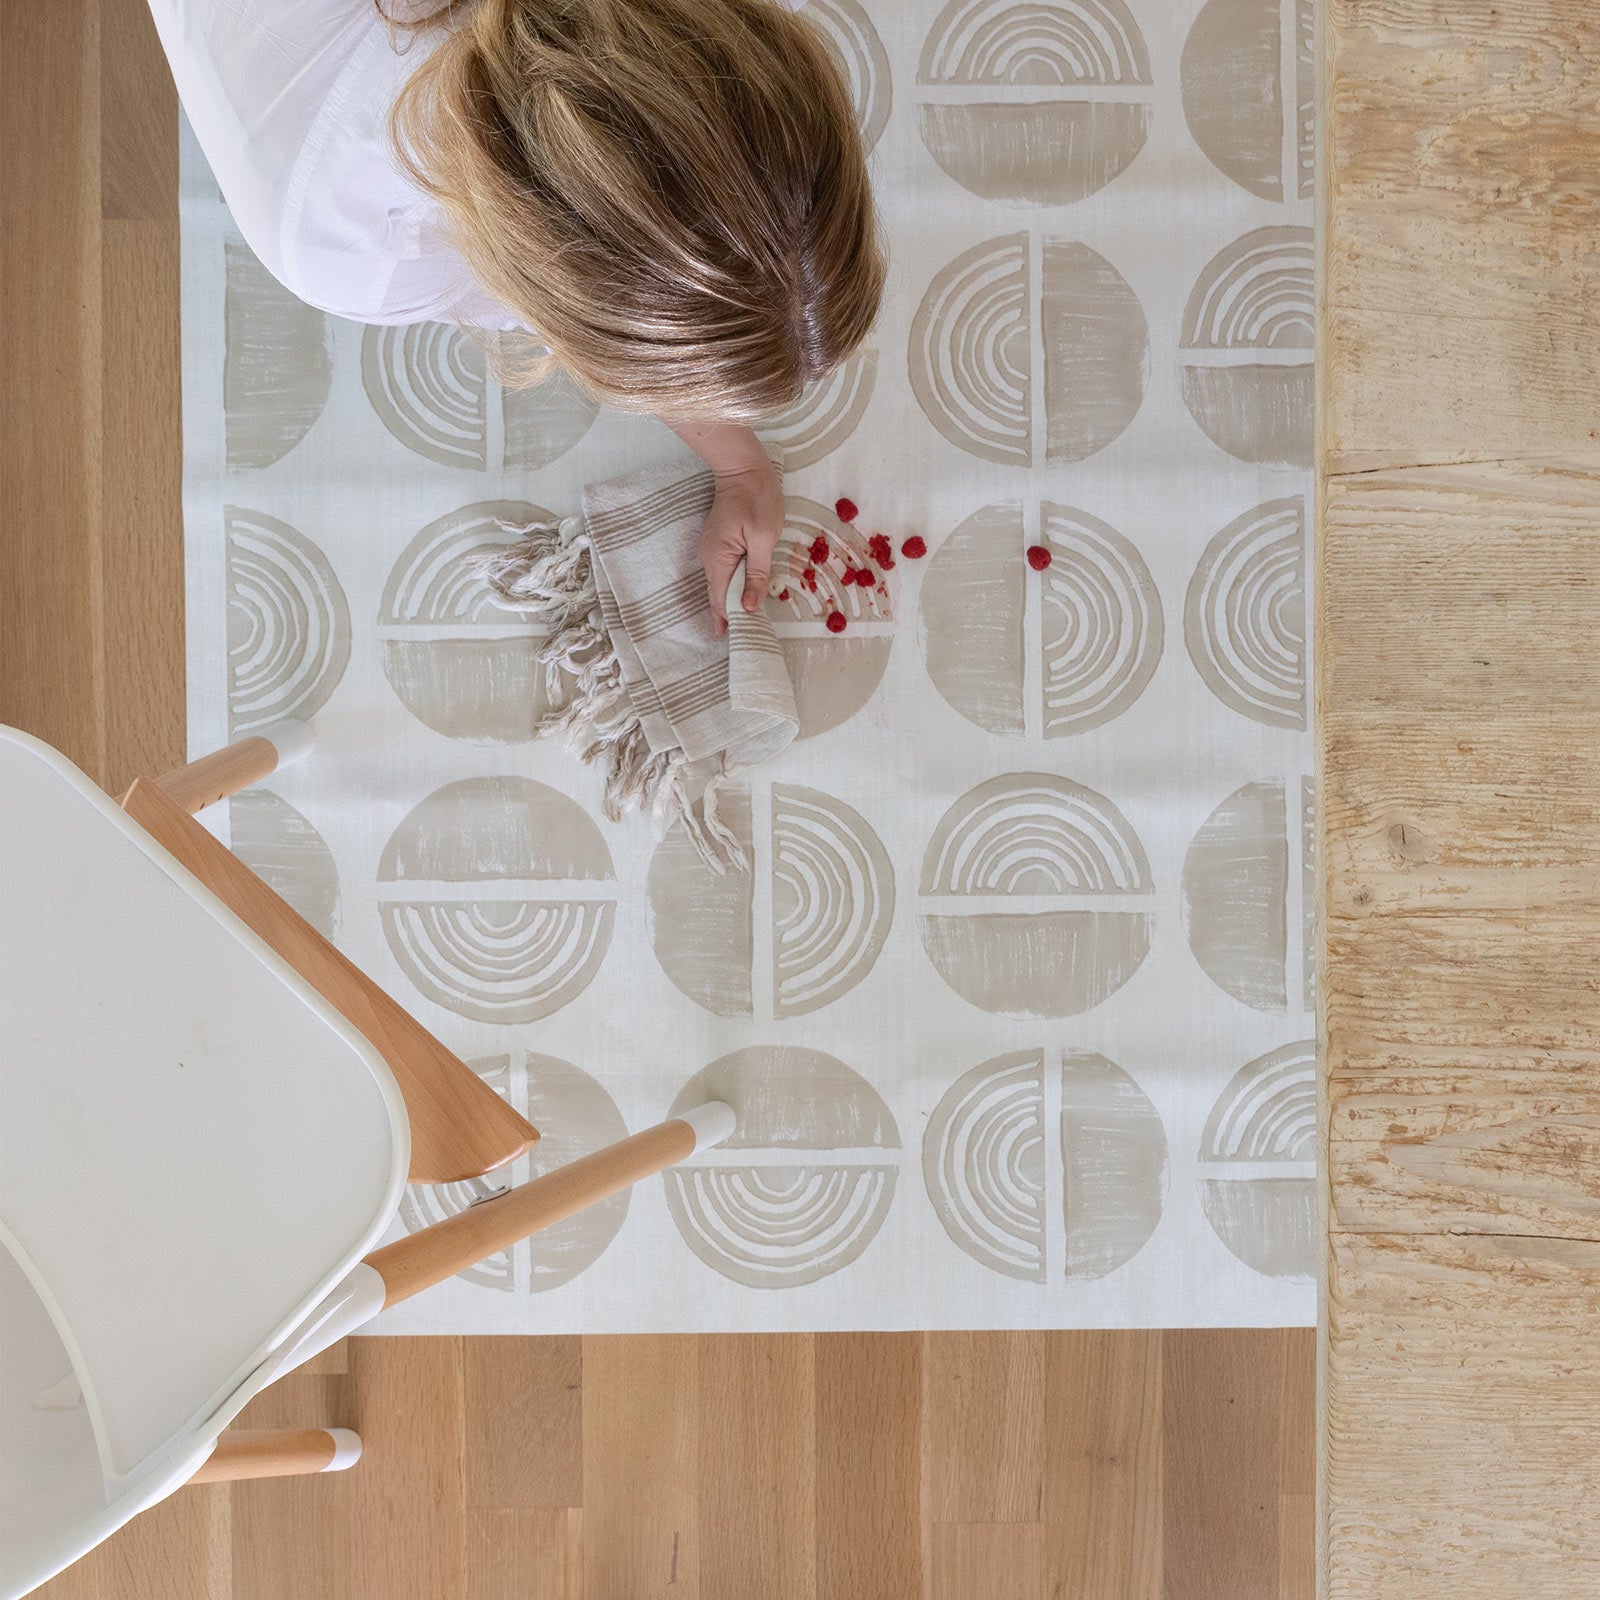 Ada modern minimalist baby high chair mat in Pebble taupe and off white. Shown from above with woman cleaning up a spill under a high chair.